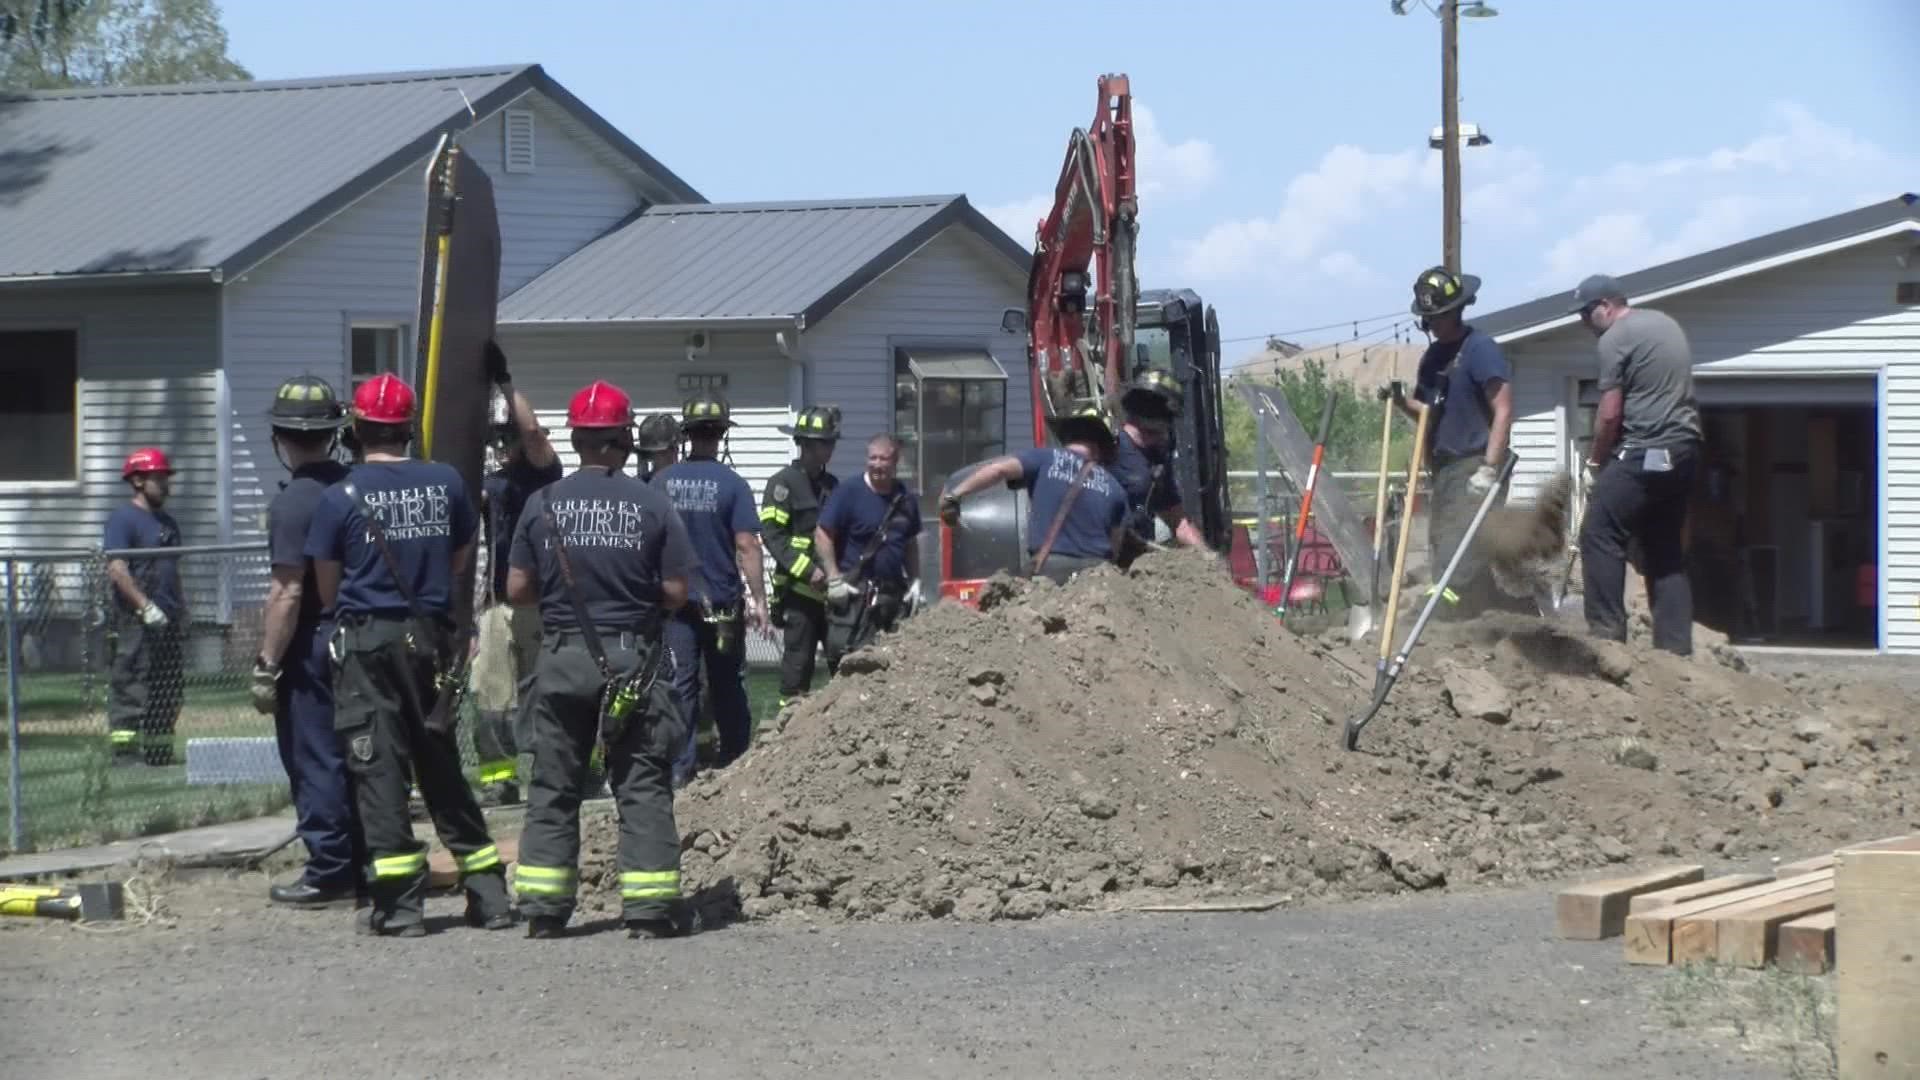 Greeley Fire said the man was doing utility work at someone's home when the trench wall gave in.